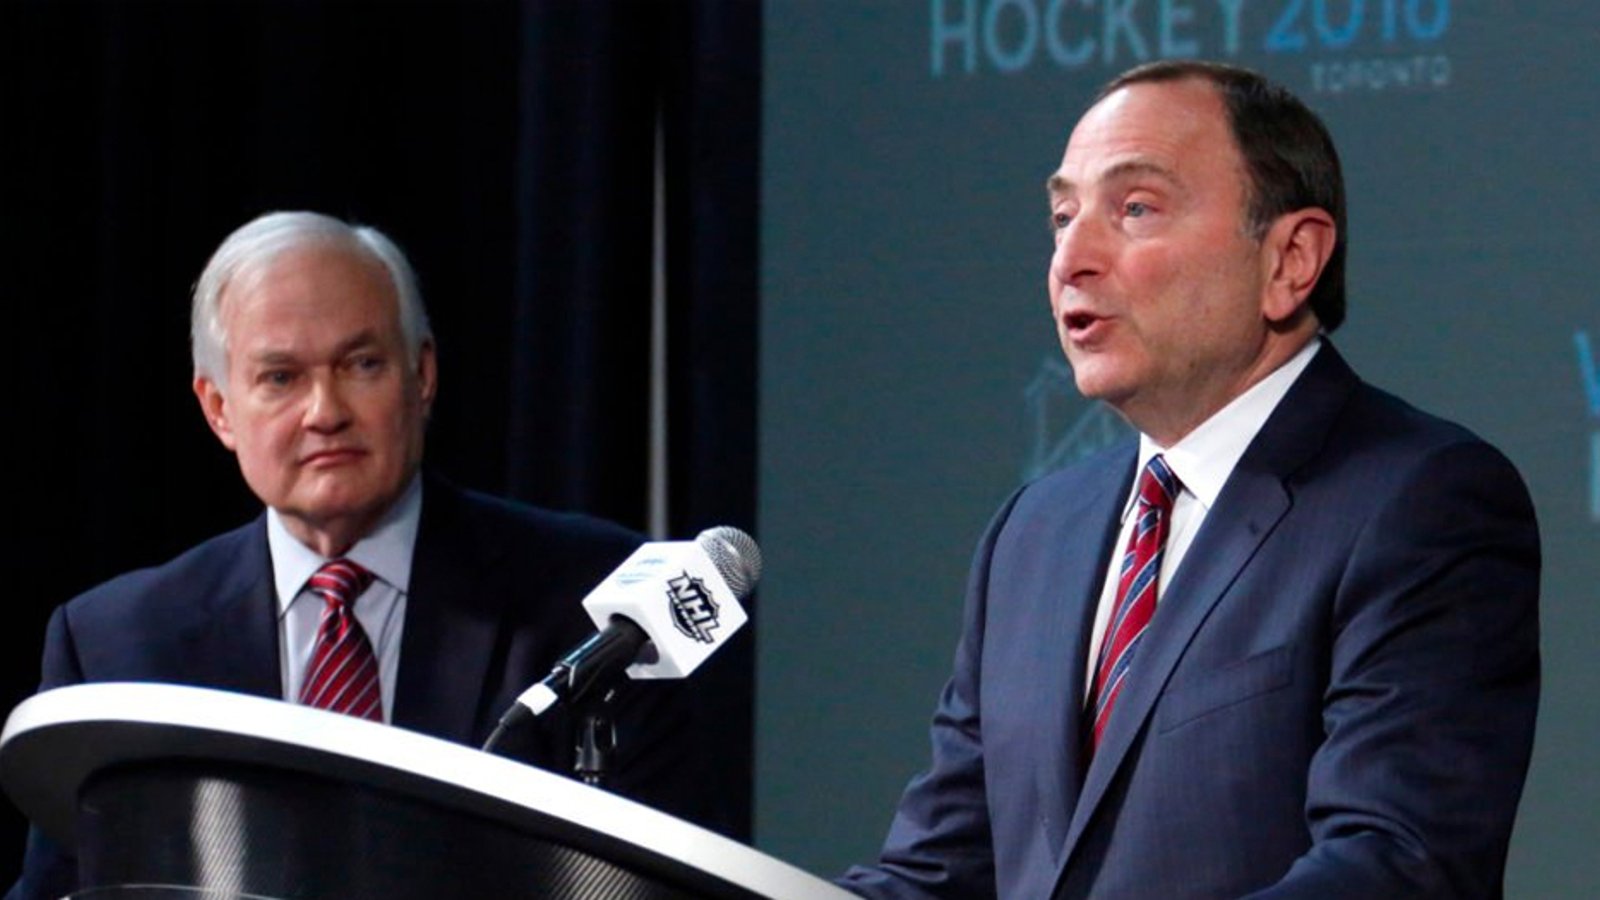 Report: War brewing between NHL and players over salary demands